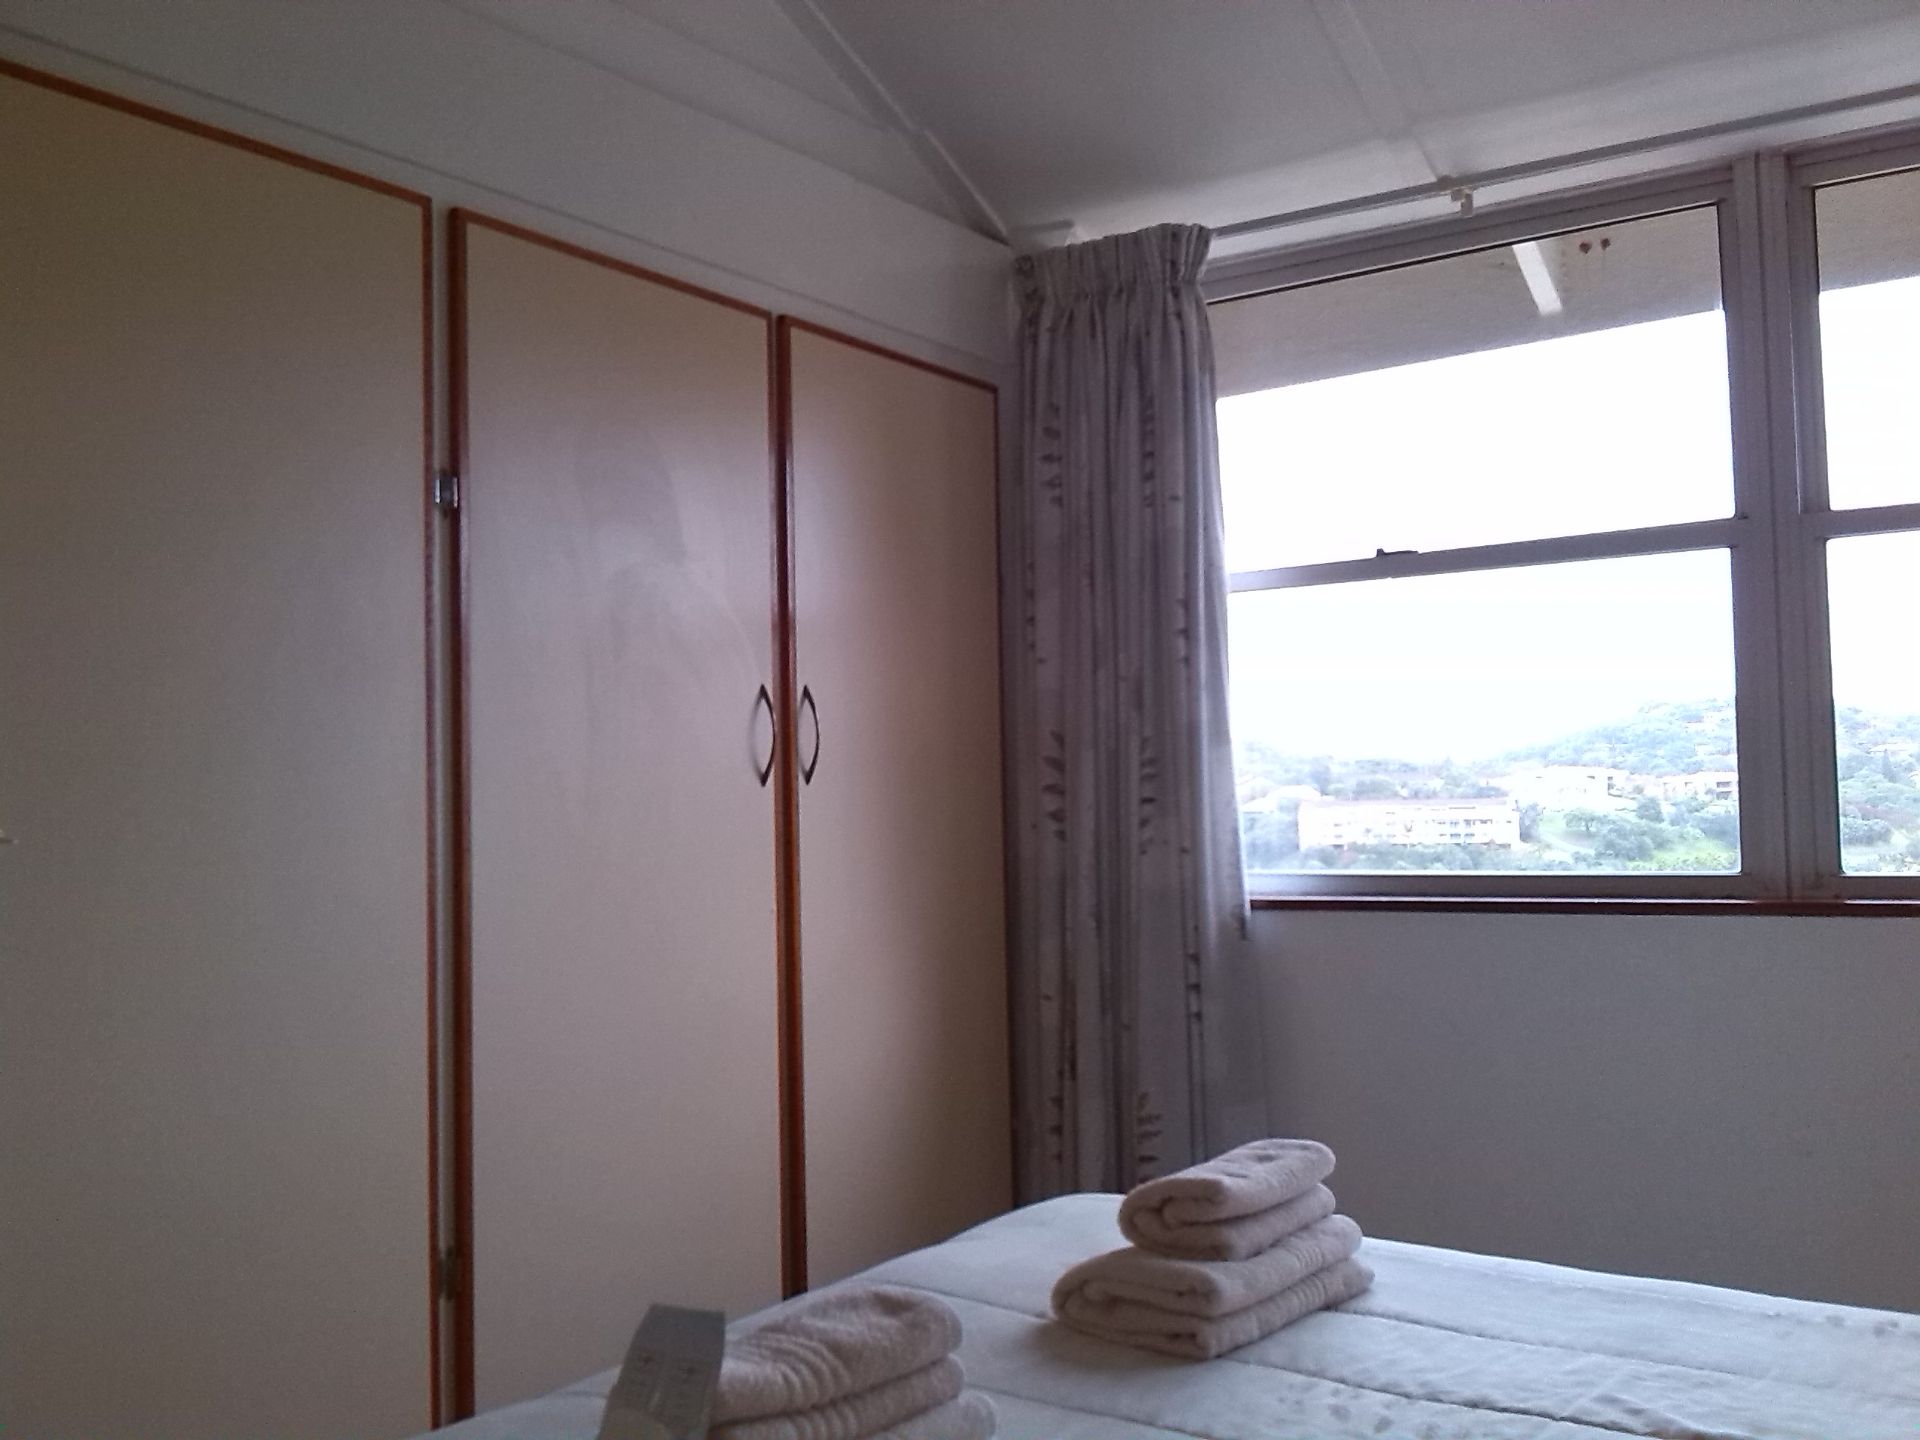 Pearly Shells - 3 Beds (8 Sleepers Max)  . Date - 20/05/2016 - 27/05/2016 - (Shareblock) - Image 18 of 32